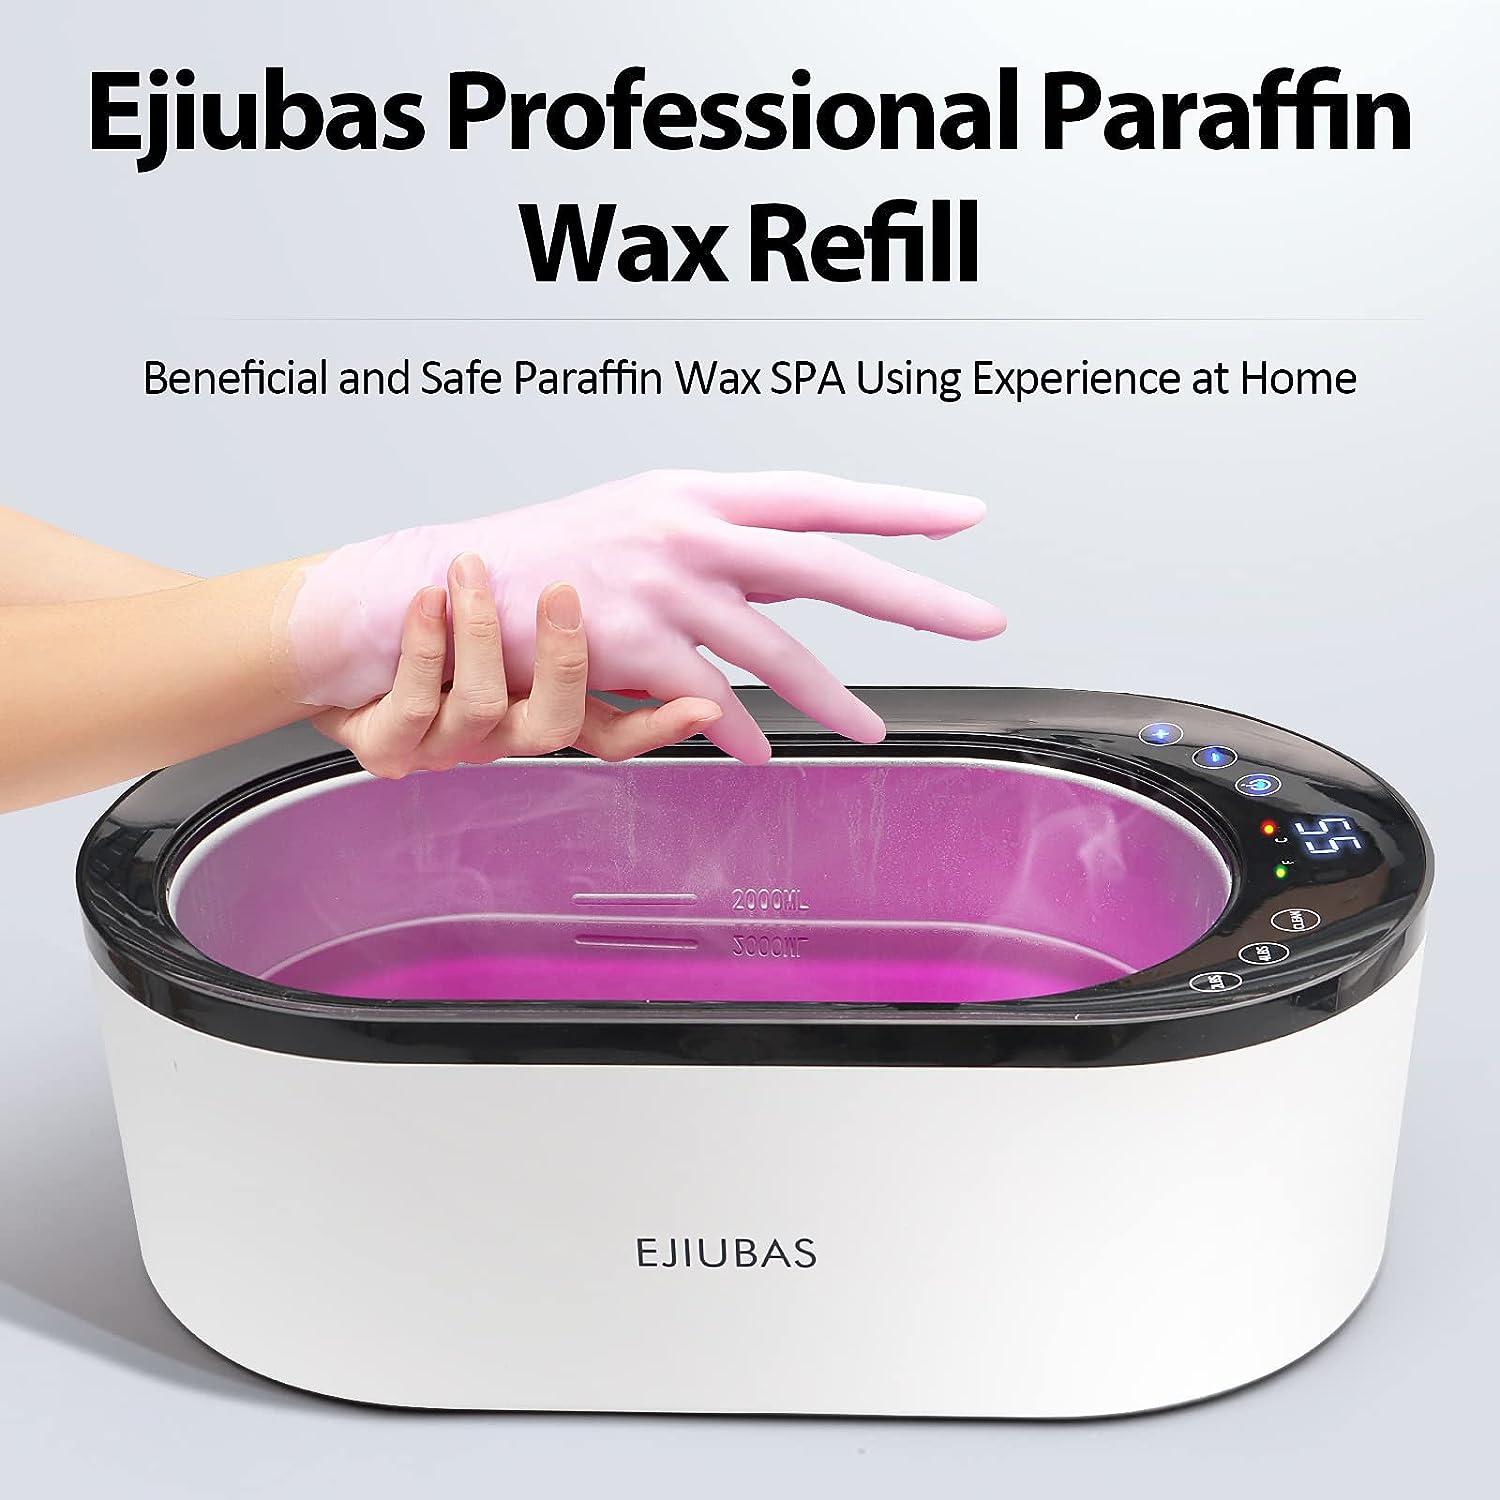 Paraffin Wax for Hand and Feet 4 lbs - Ejiubas Lavender Paraffin Wax Blocks  for Paraffin Wax Machine,Paraffin Wax Refills, Relieve Arthitis Pain and  Stiff Muscles Deep Hydration